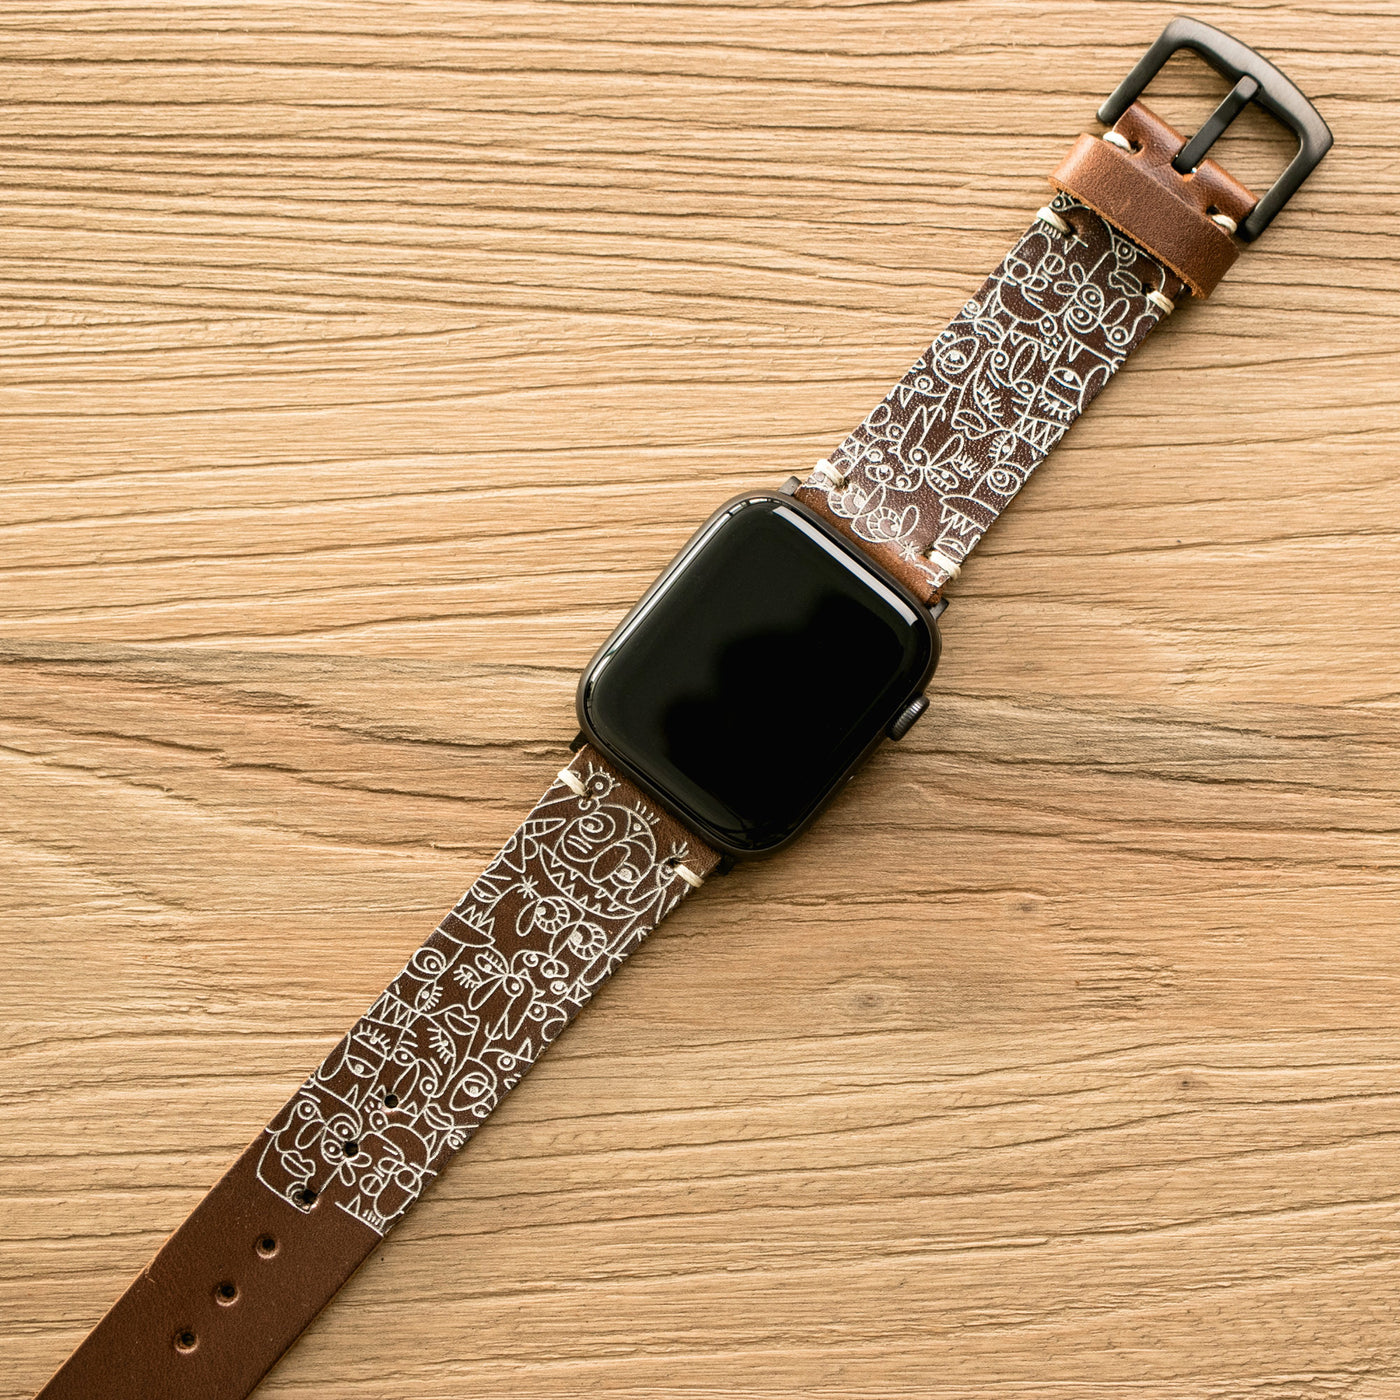 Faces - Apple Watch Leather Band - Antique Brown